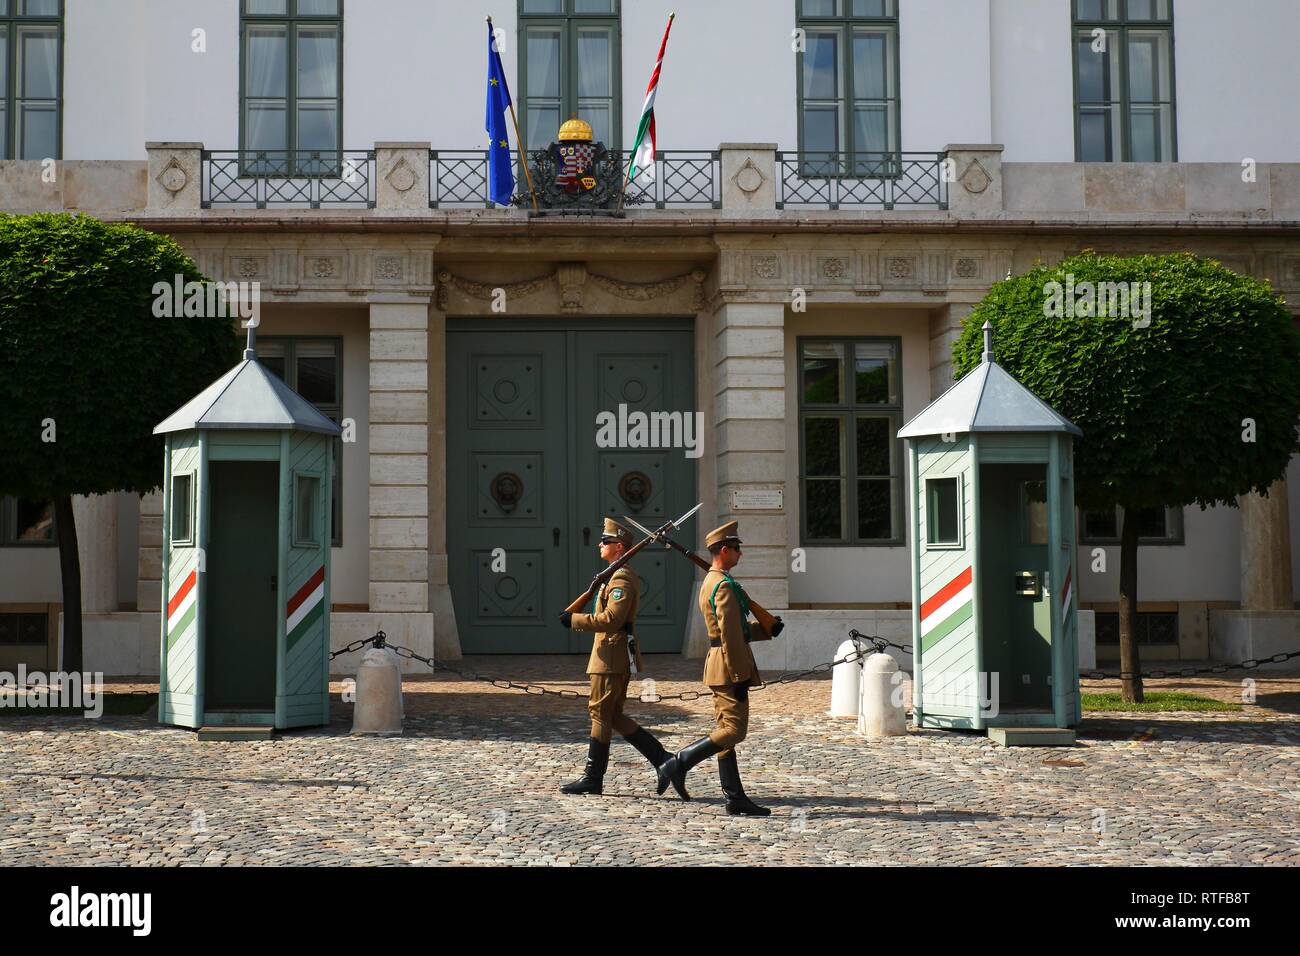 Guard soldiers in front of the Presidential Palace Palais Sándor, Sandor Palace, Castle District, Buda District, Budapest Stock Photo